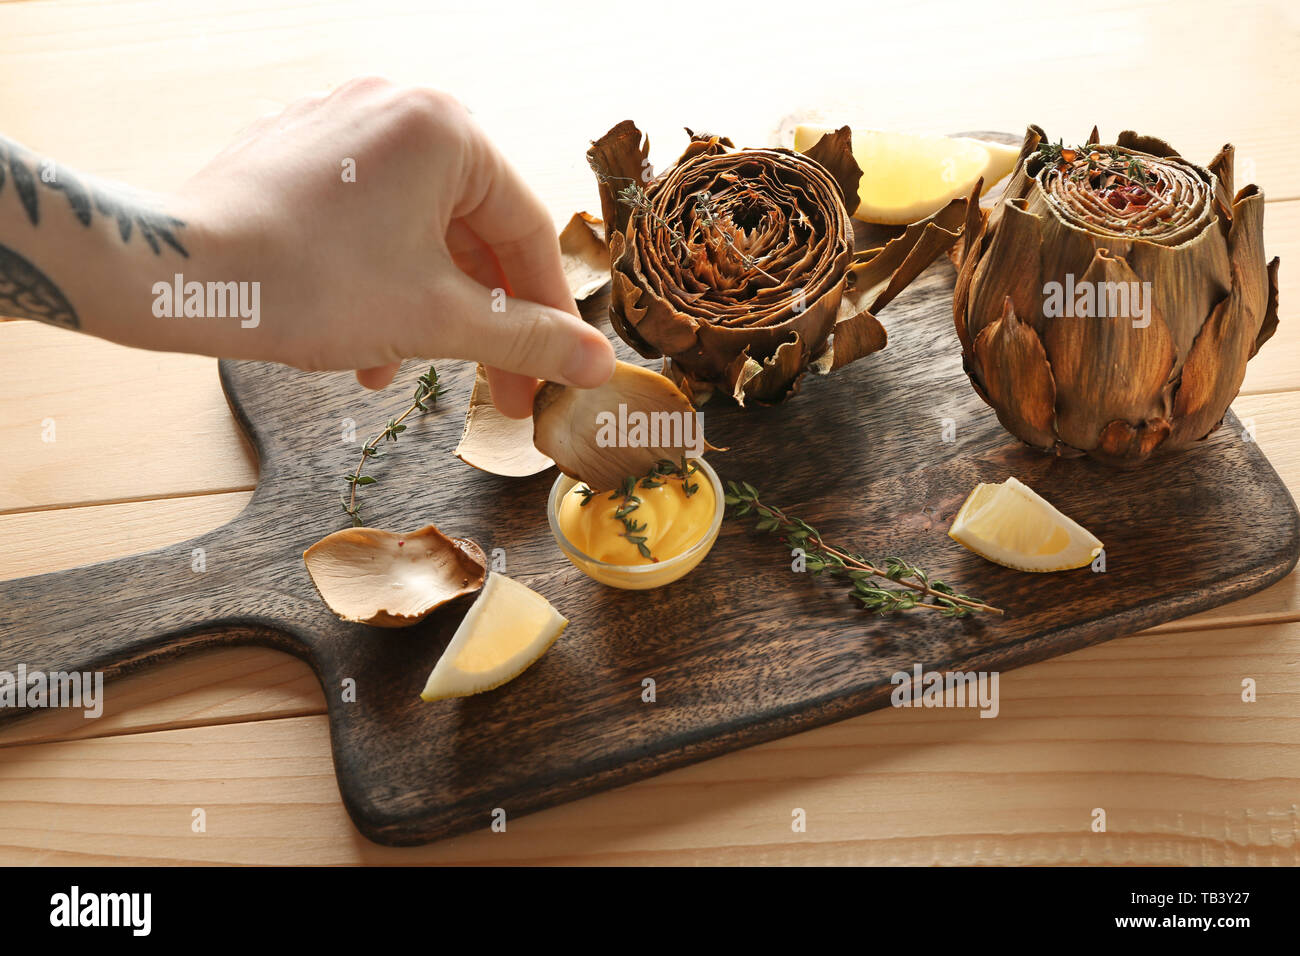 Woman eating tasty baked artichoke with sauce, closeup Stock Photo